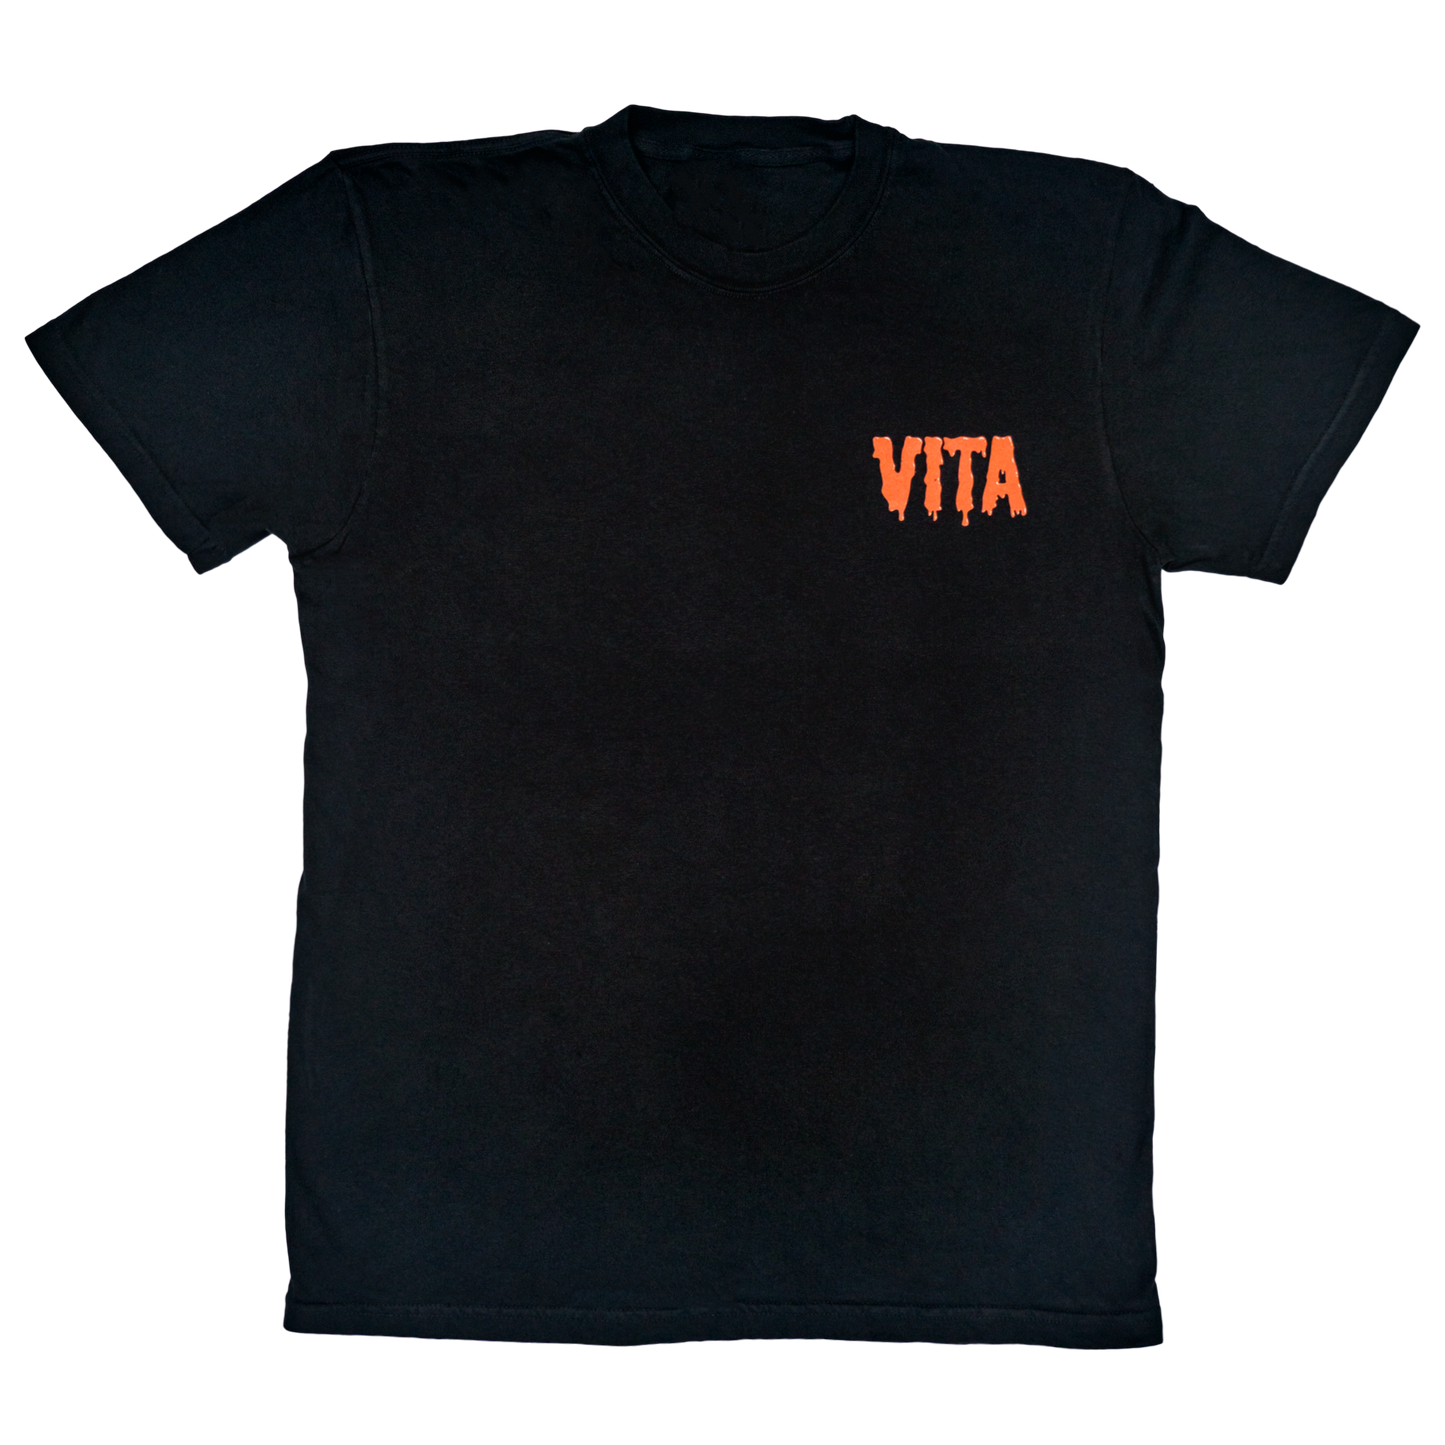 Product Image: front of shirt with Vita logo.